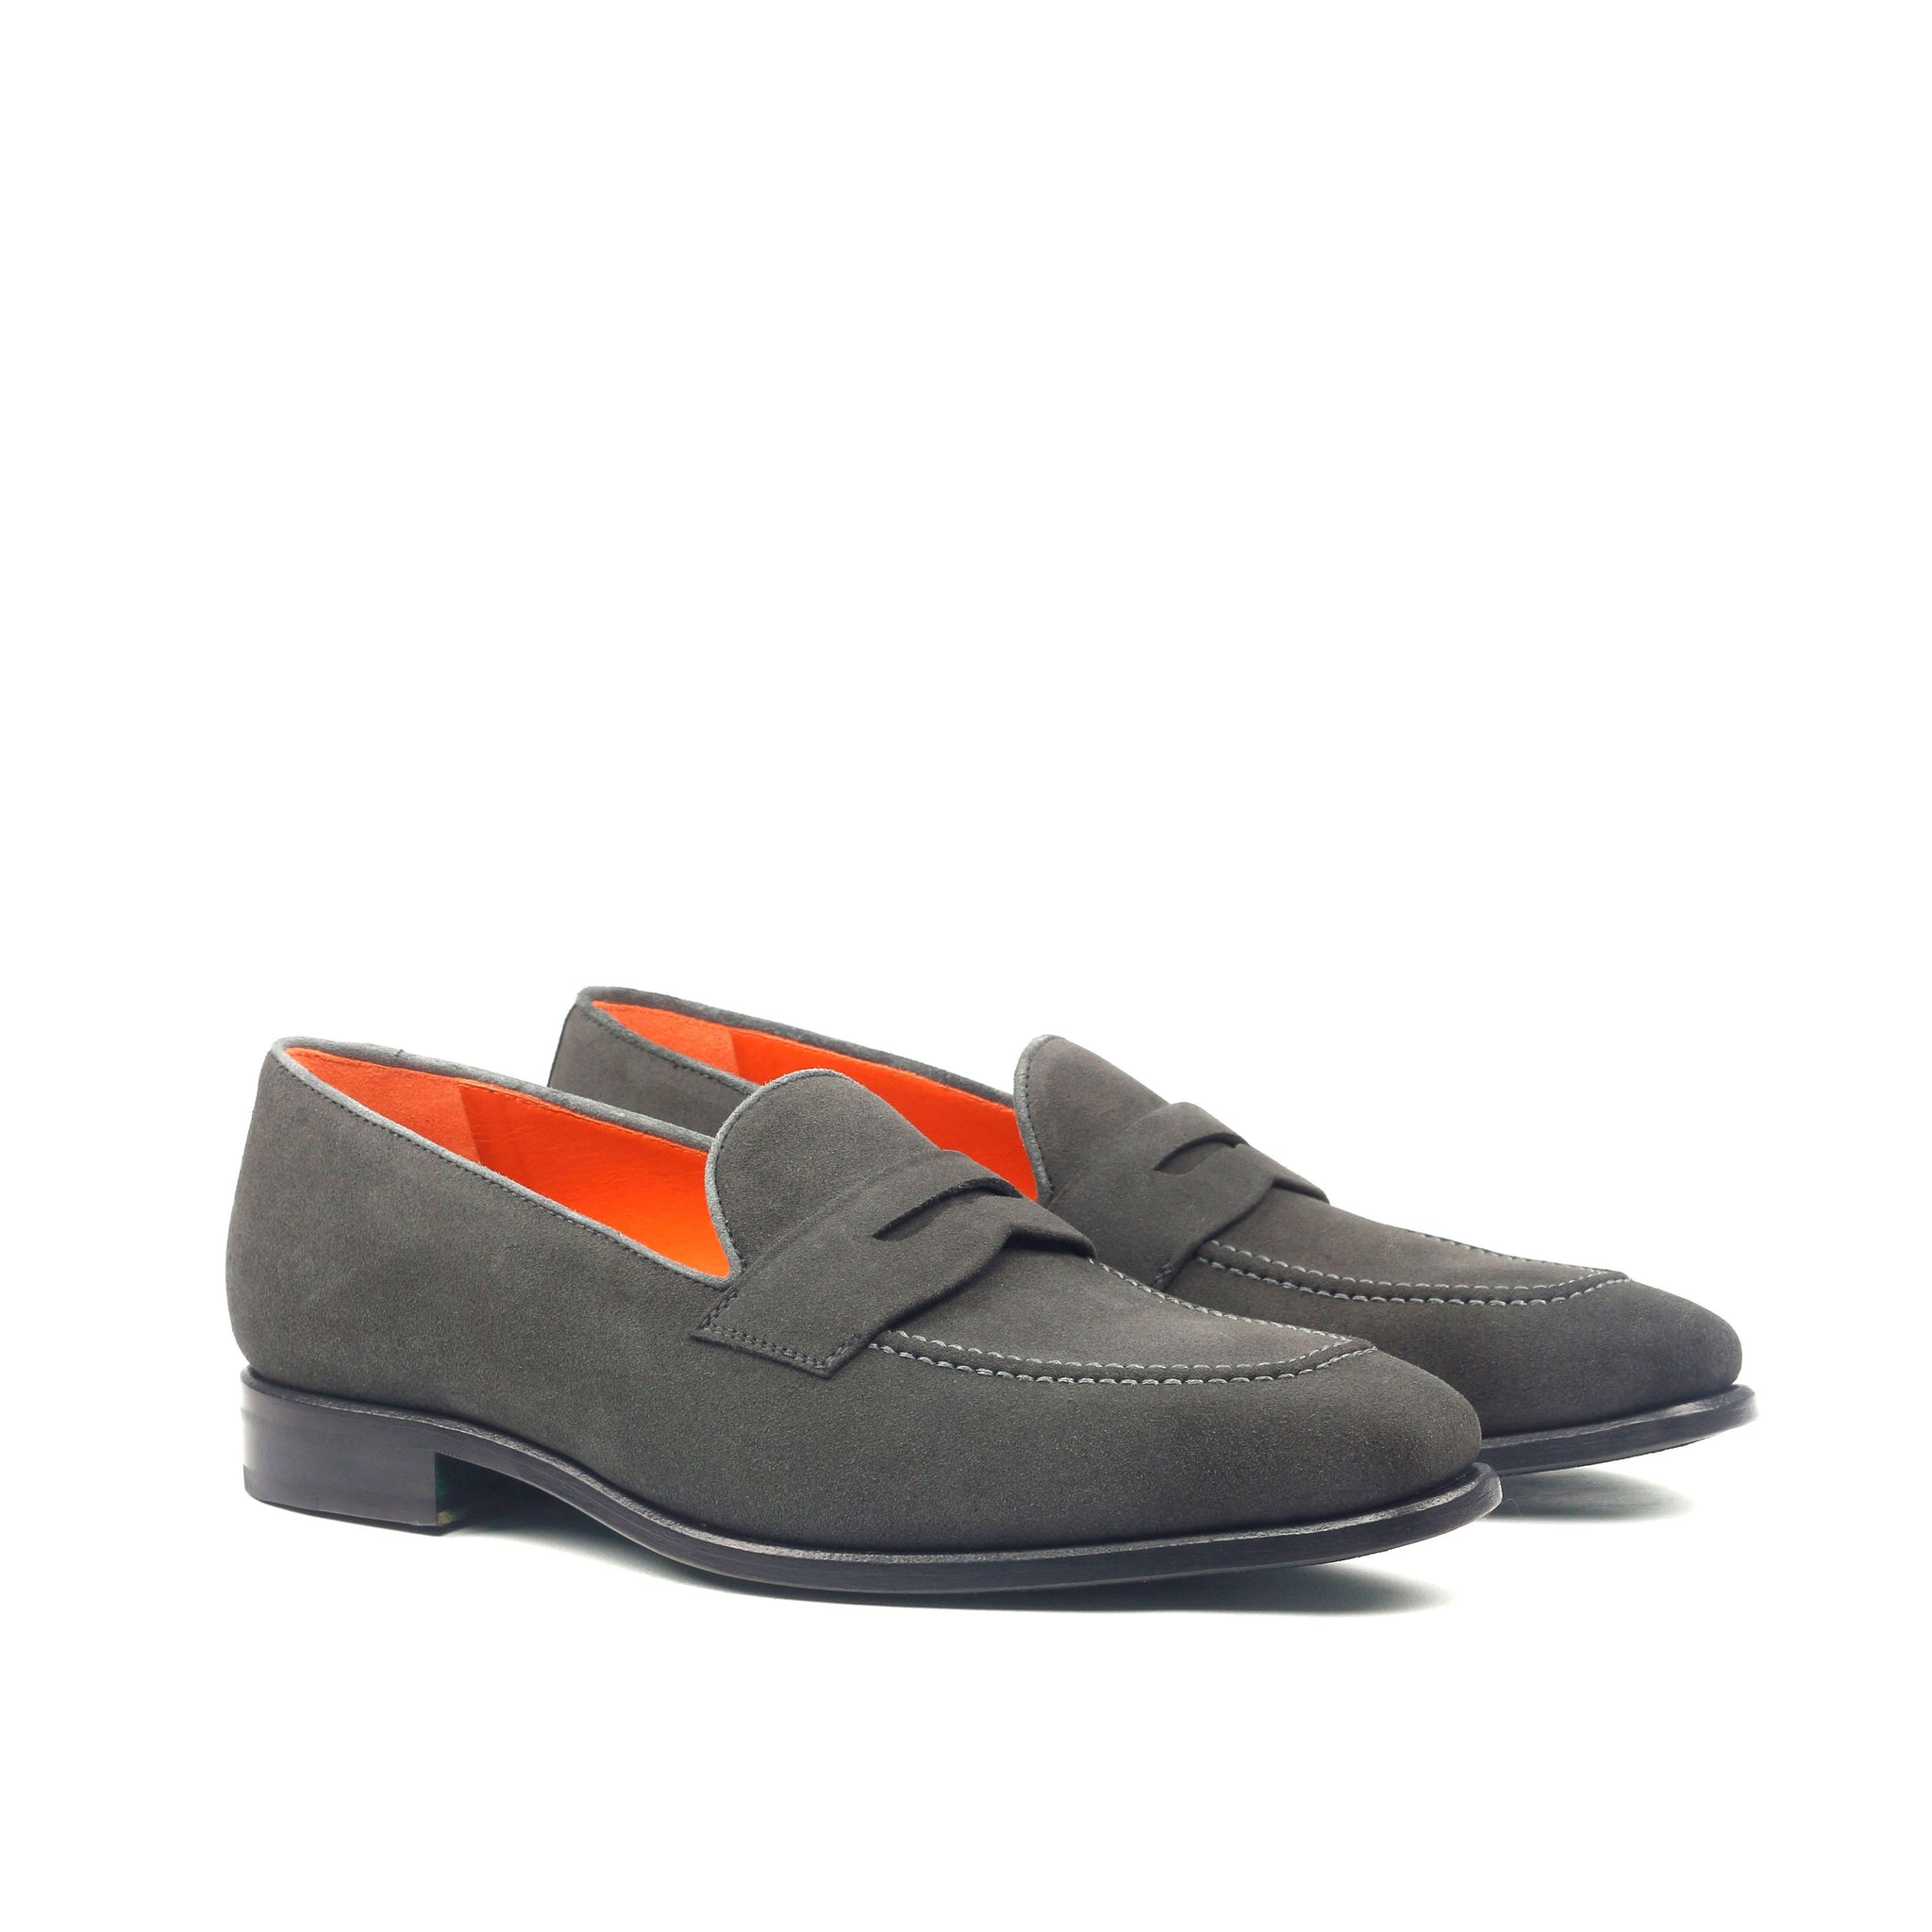 Unique Handcrafted Grey Lux Suede Slip on Loafer